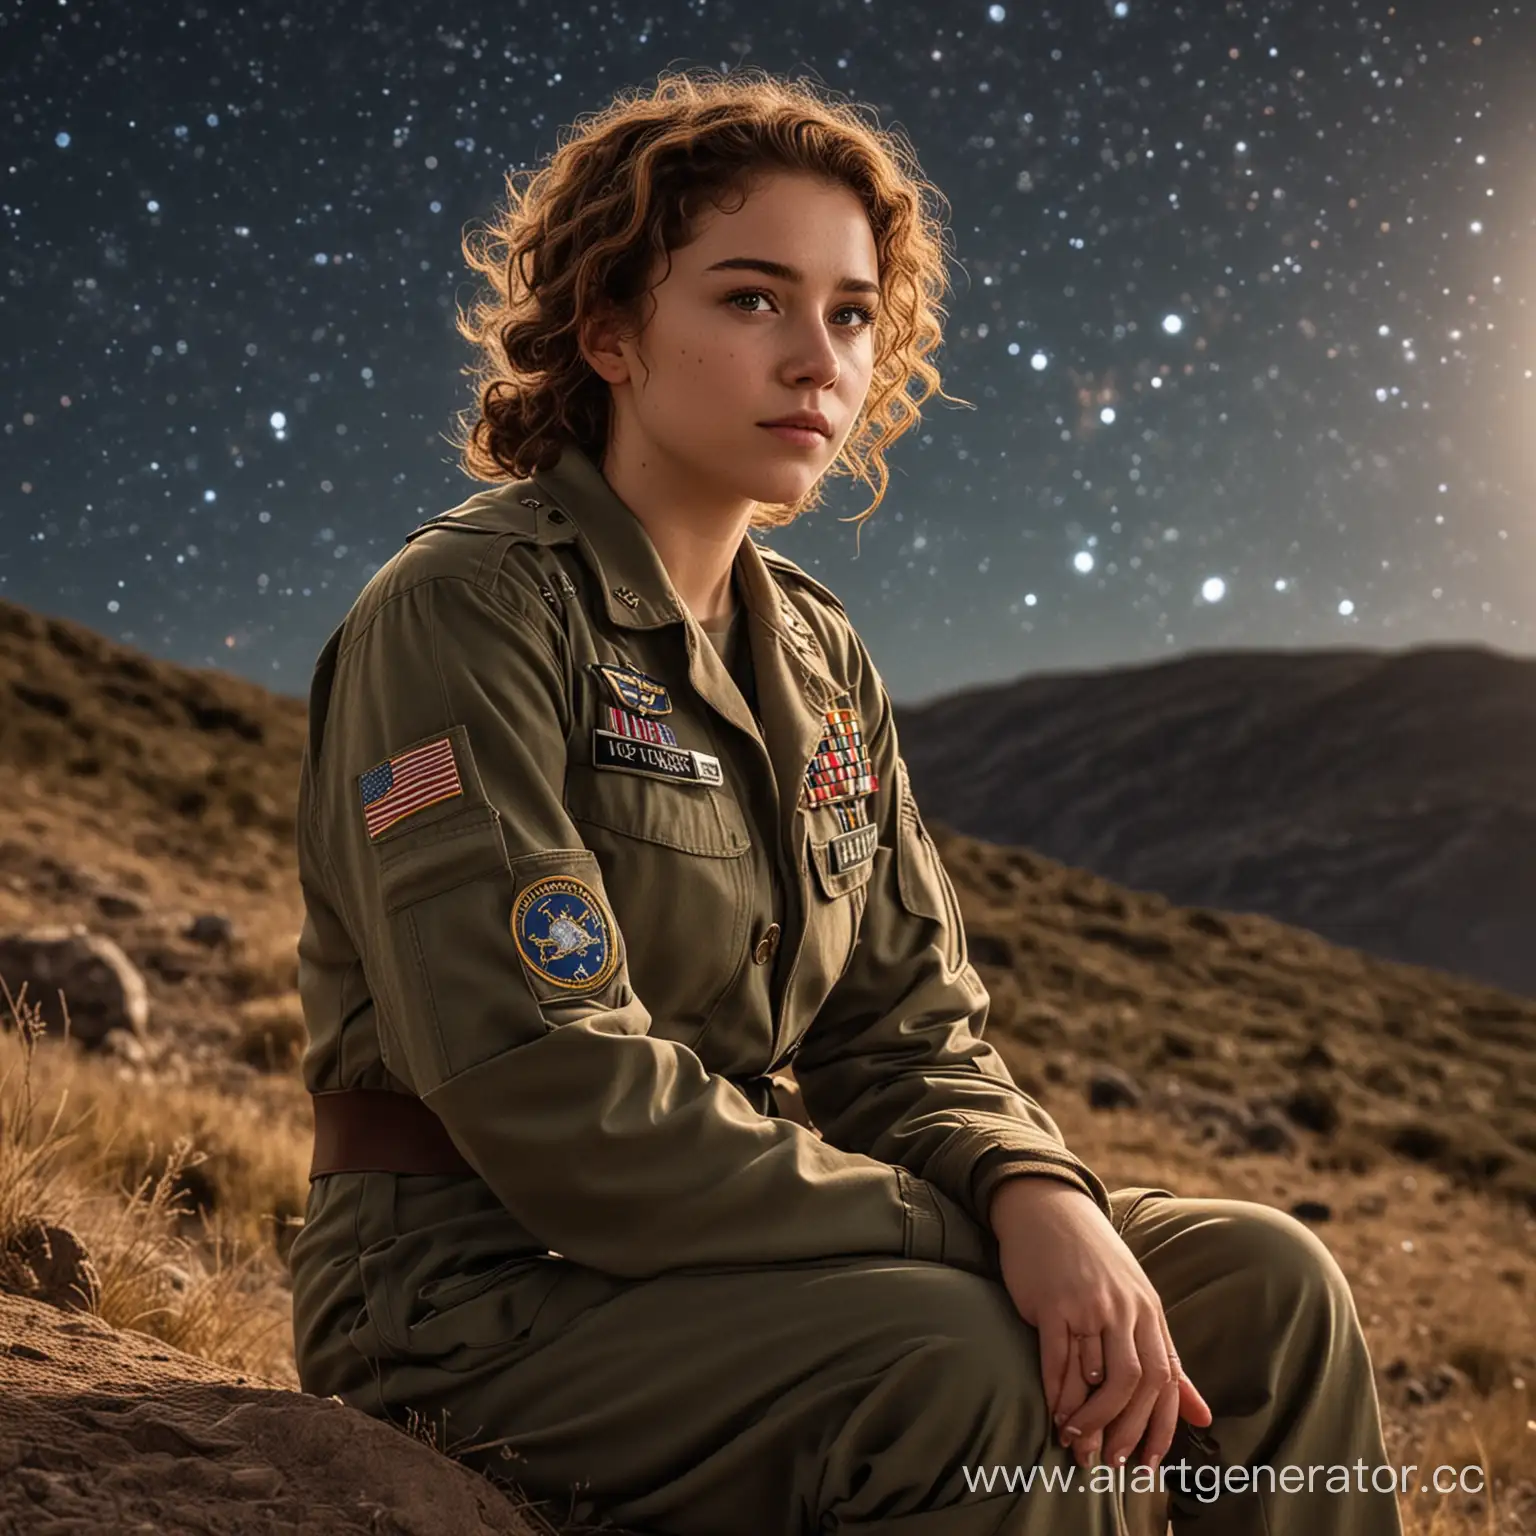 Ally sits on a hill pointing out the constellations to Lydia.

Ally - 18 year-old girl with a boho style, short brown curly hair, a round face, and warm skin. She is dressed in a medic uniform in the army.